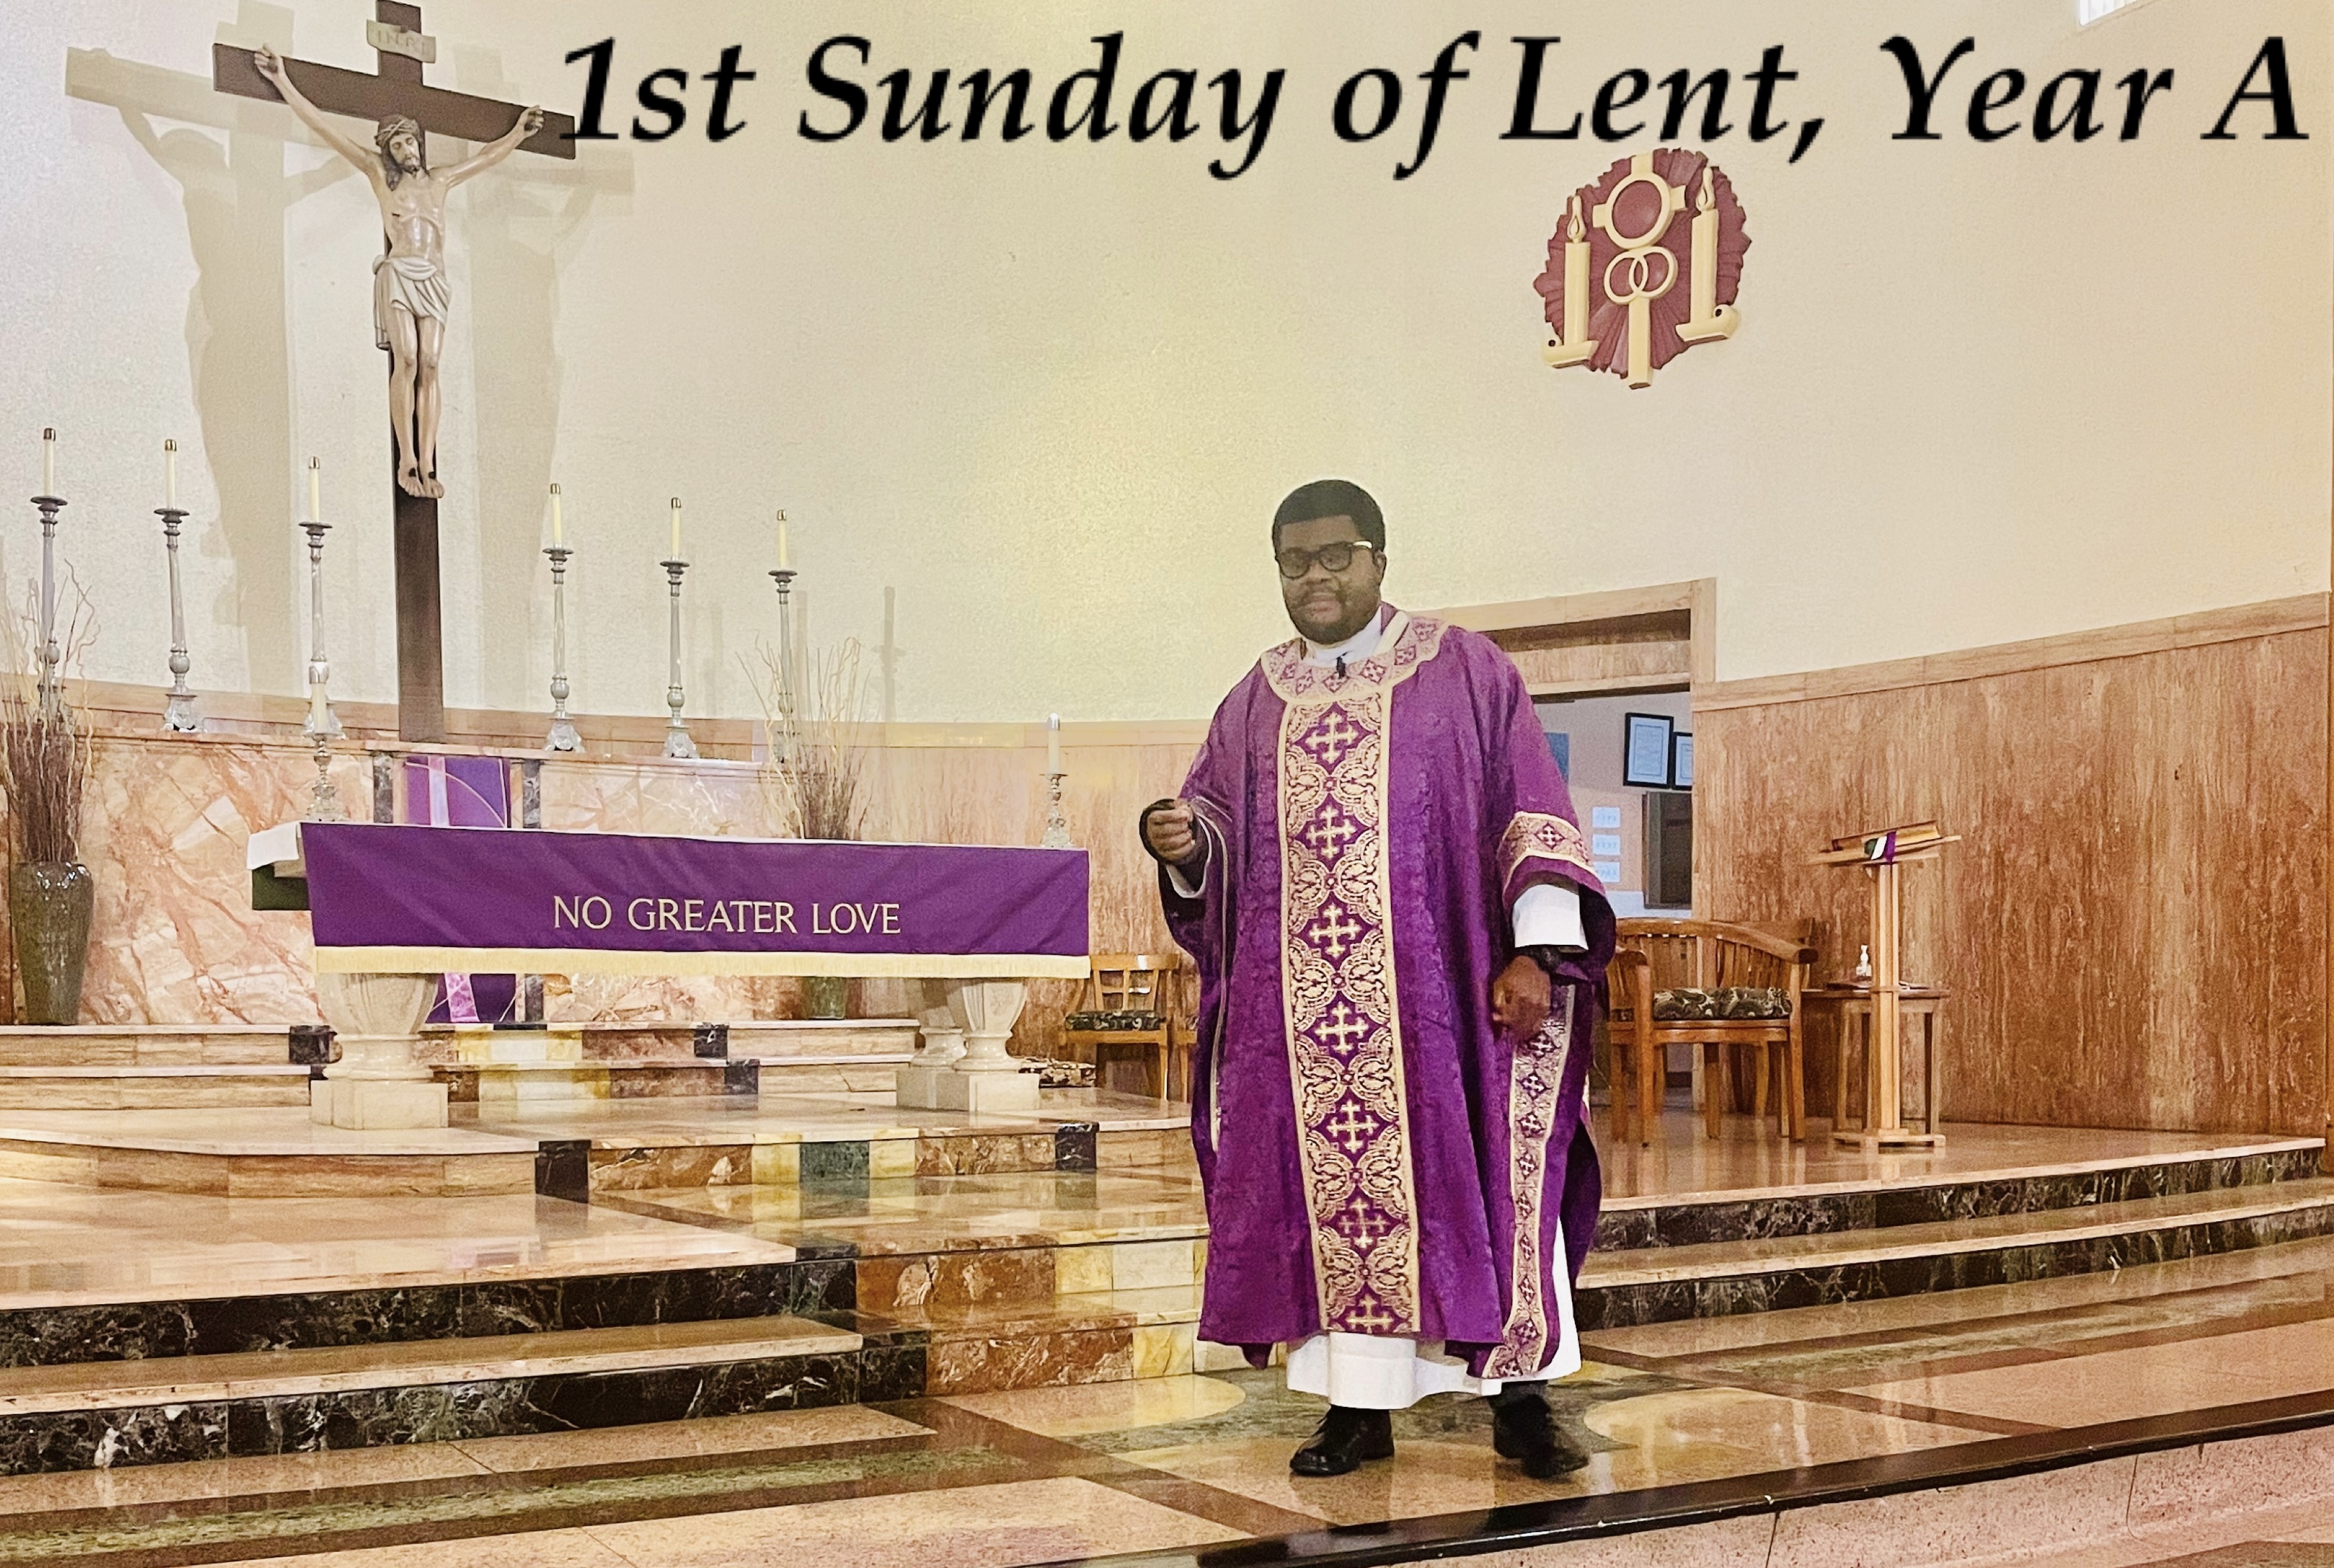 1st Sunday of Lent, Year A